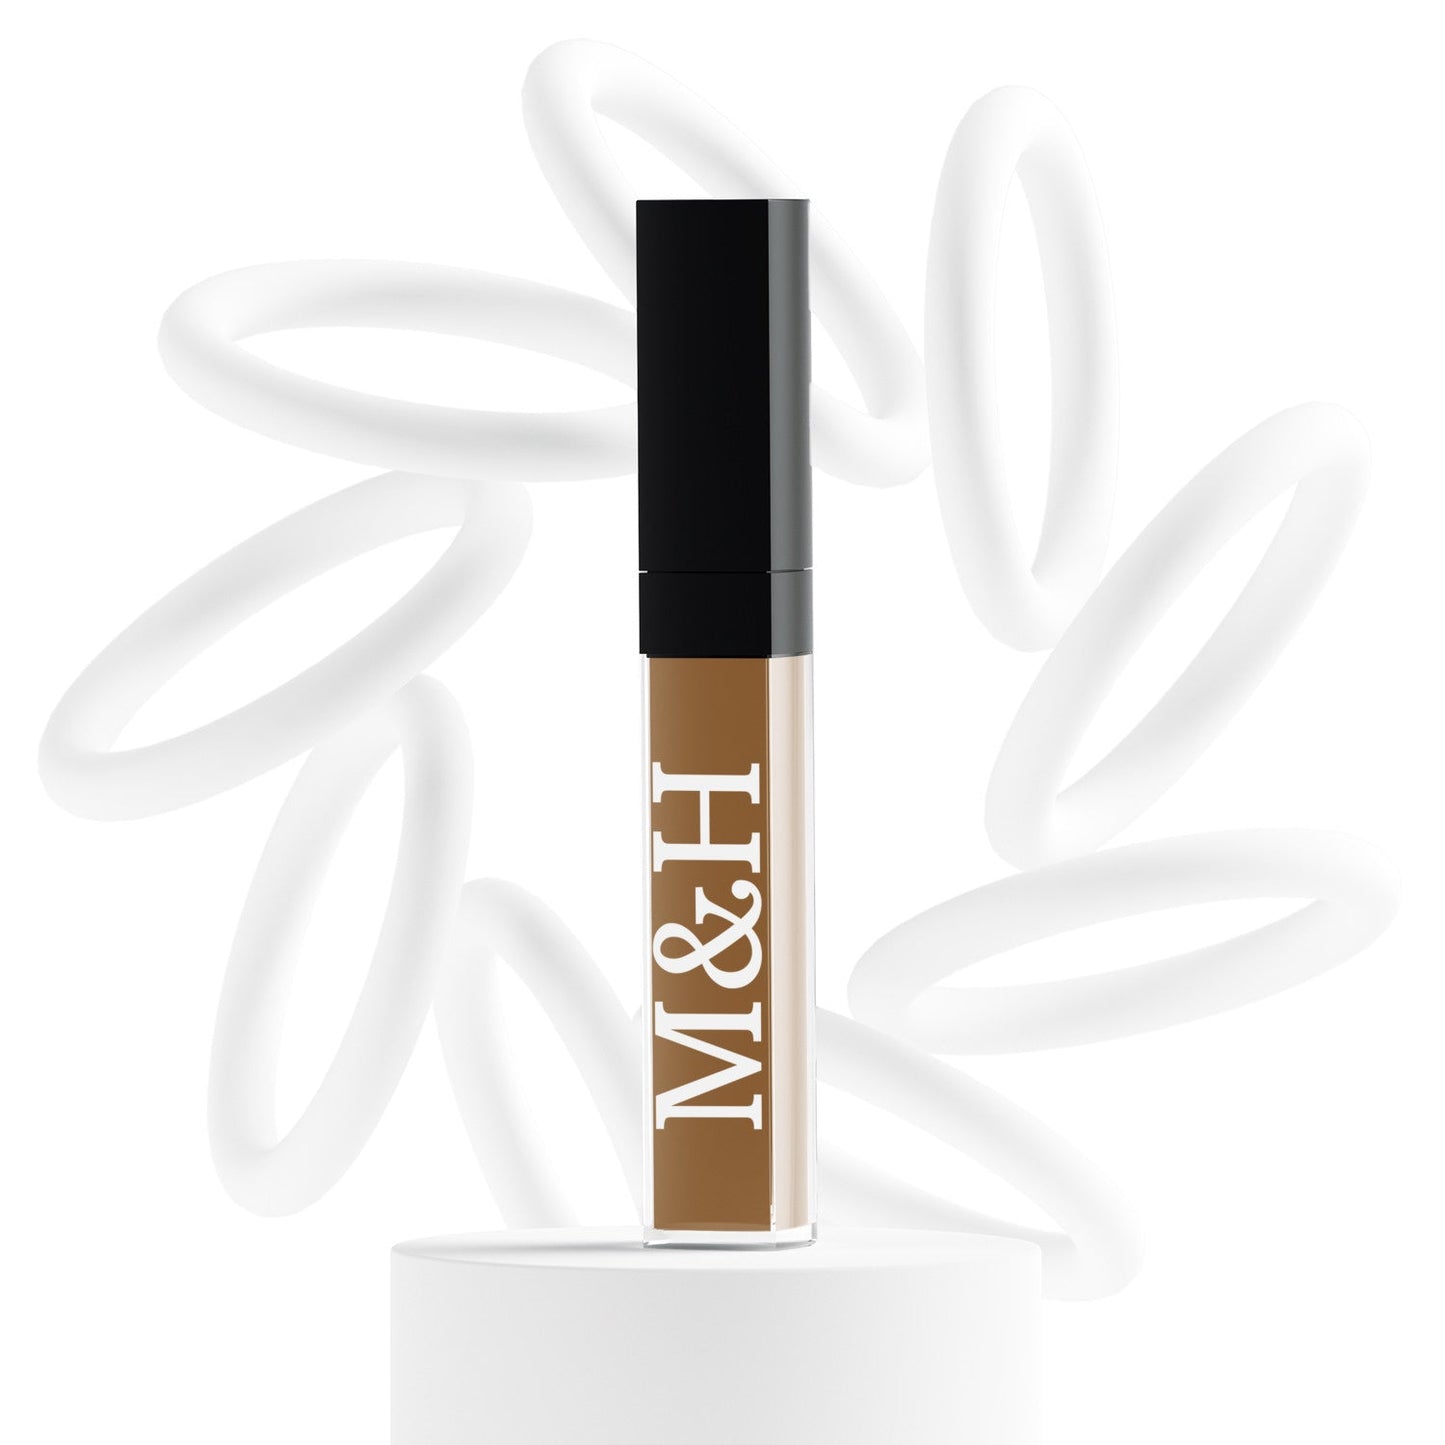 Vegan Concealers - M&H FashionVegan ConcealersconcealerM&H FashionM&H FashionConcealer-909AmberVegan ConcealersM&H FashionconcealerM&H Fashion This multifunctional concealer is designed to cover under-eye circles, complexion alterations, and major imperfections like scars, hyperpigmentation, burns, and tatVegan Concealers